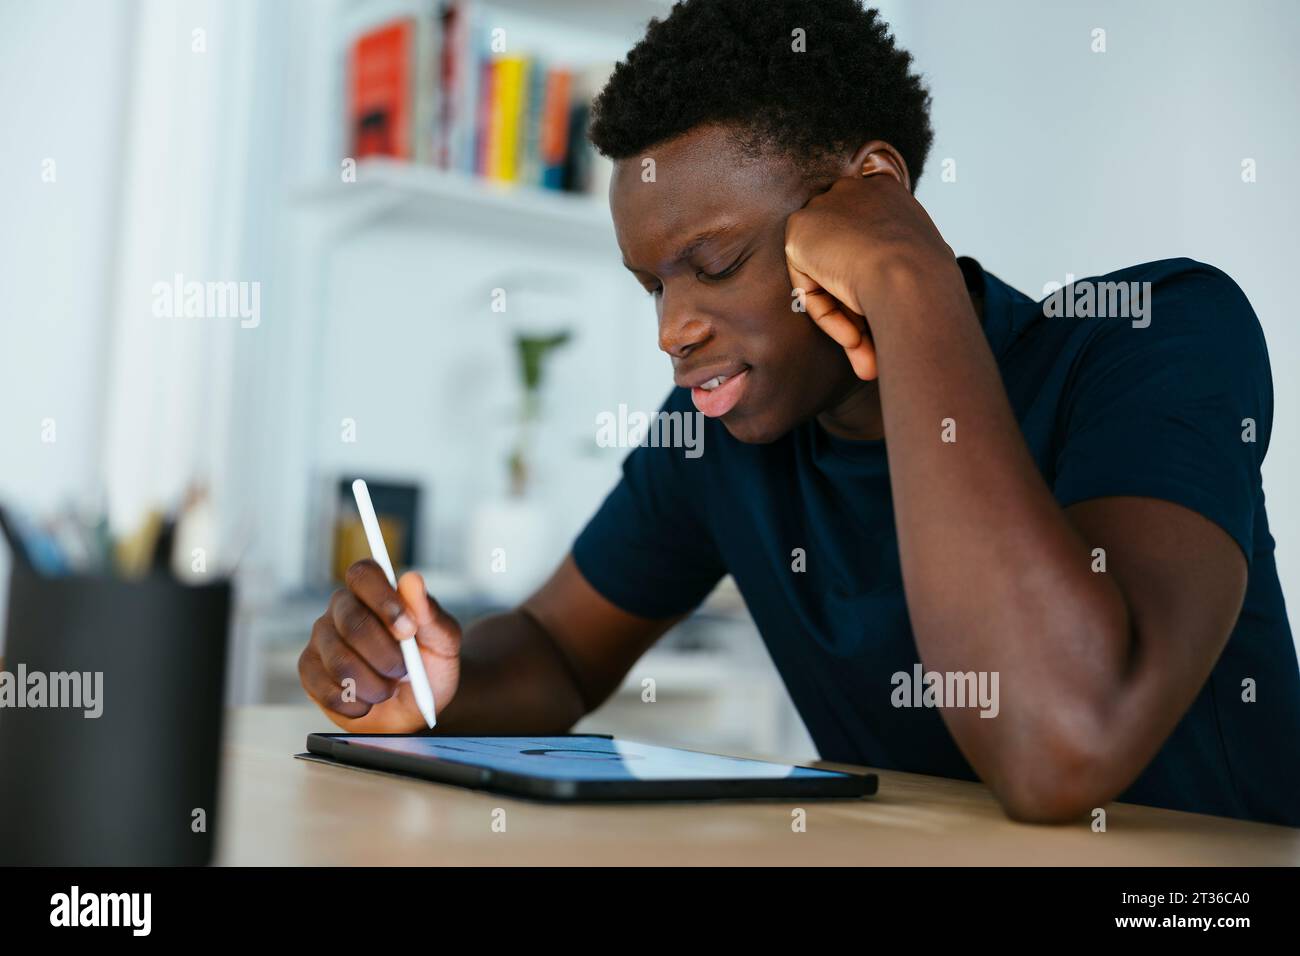 Young student studying and writing on tablet PC at desk Stock Photo